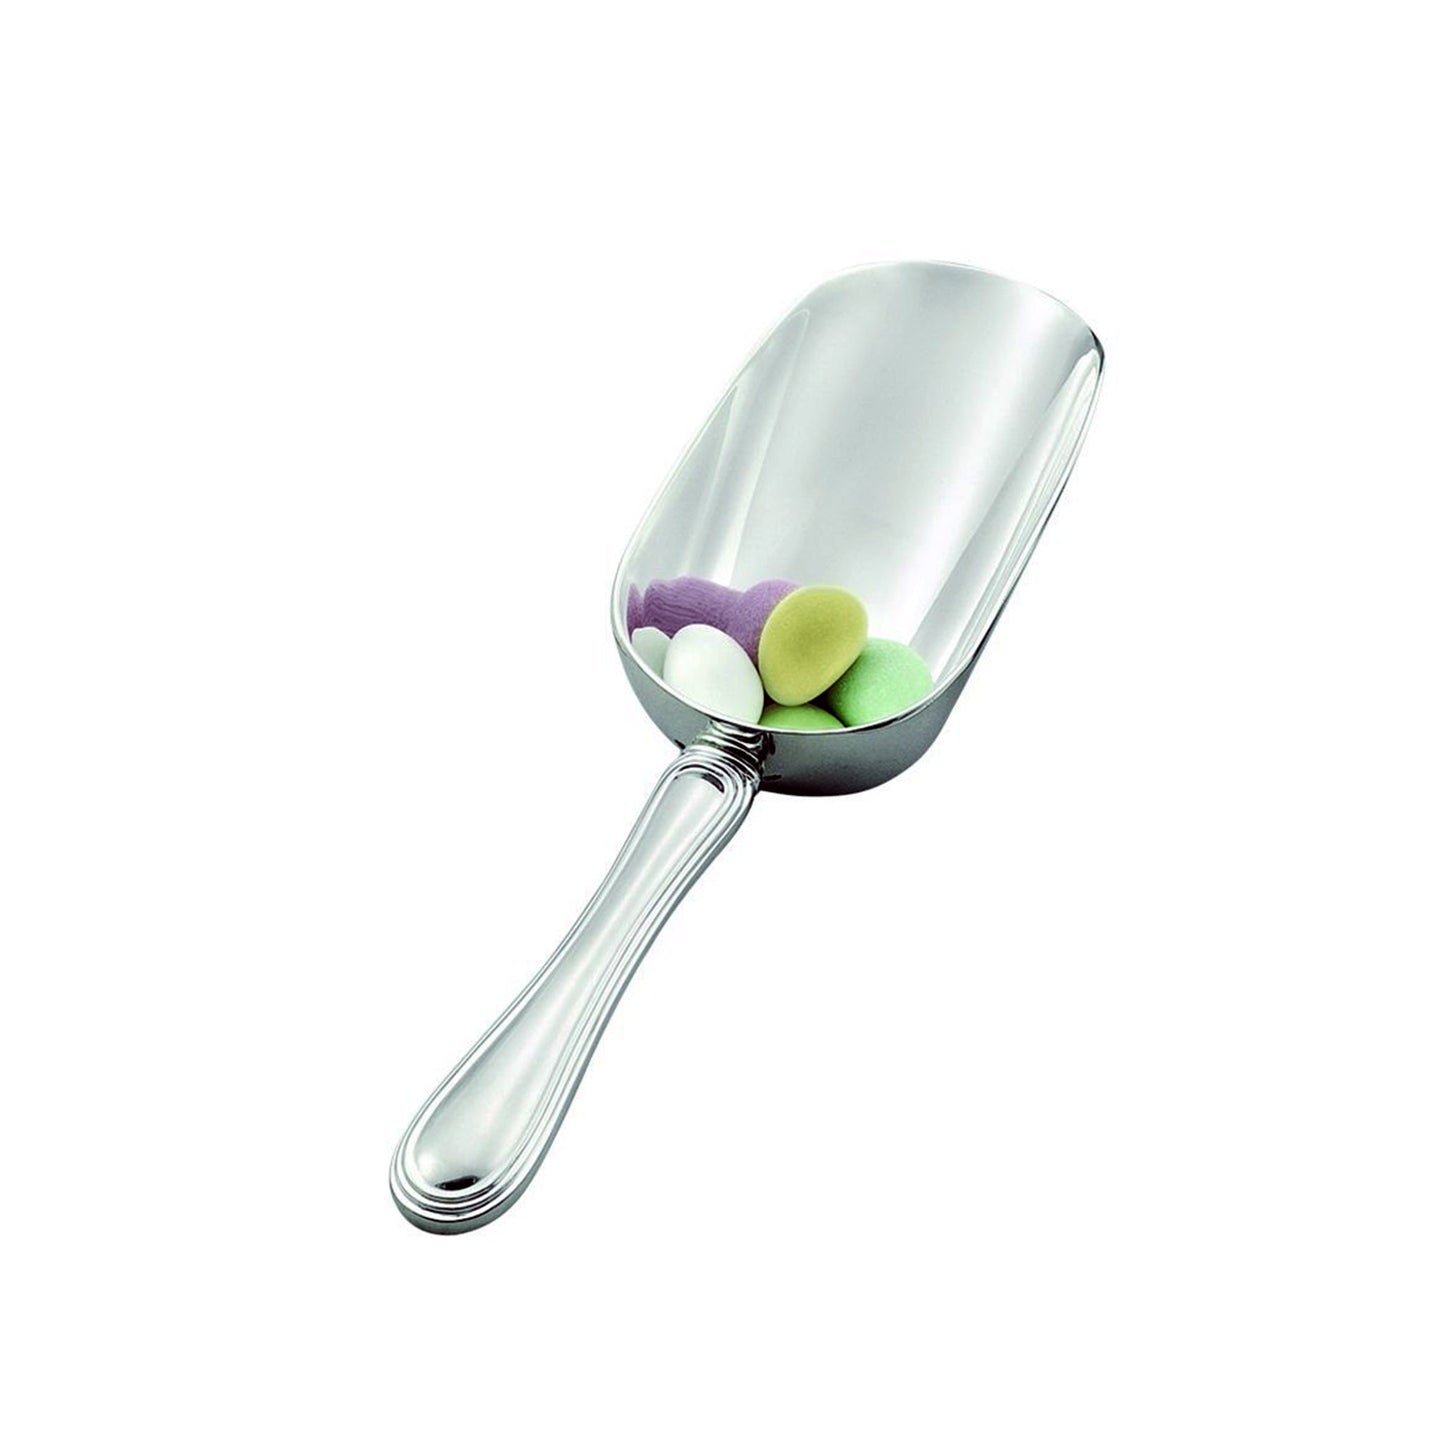 Westwood Handled Ice Scoop by Creative Gifts